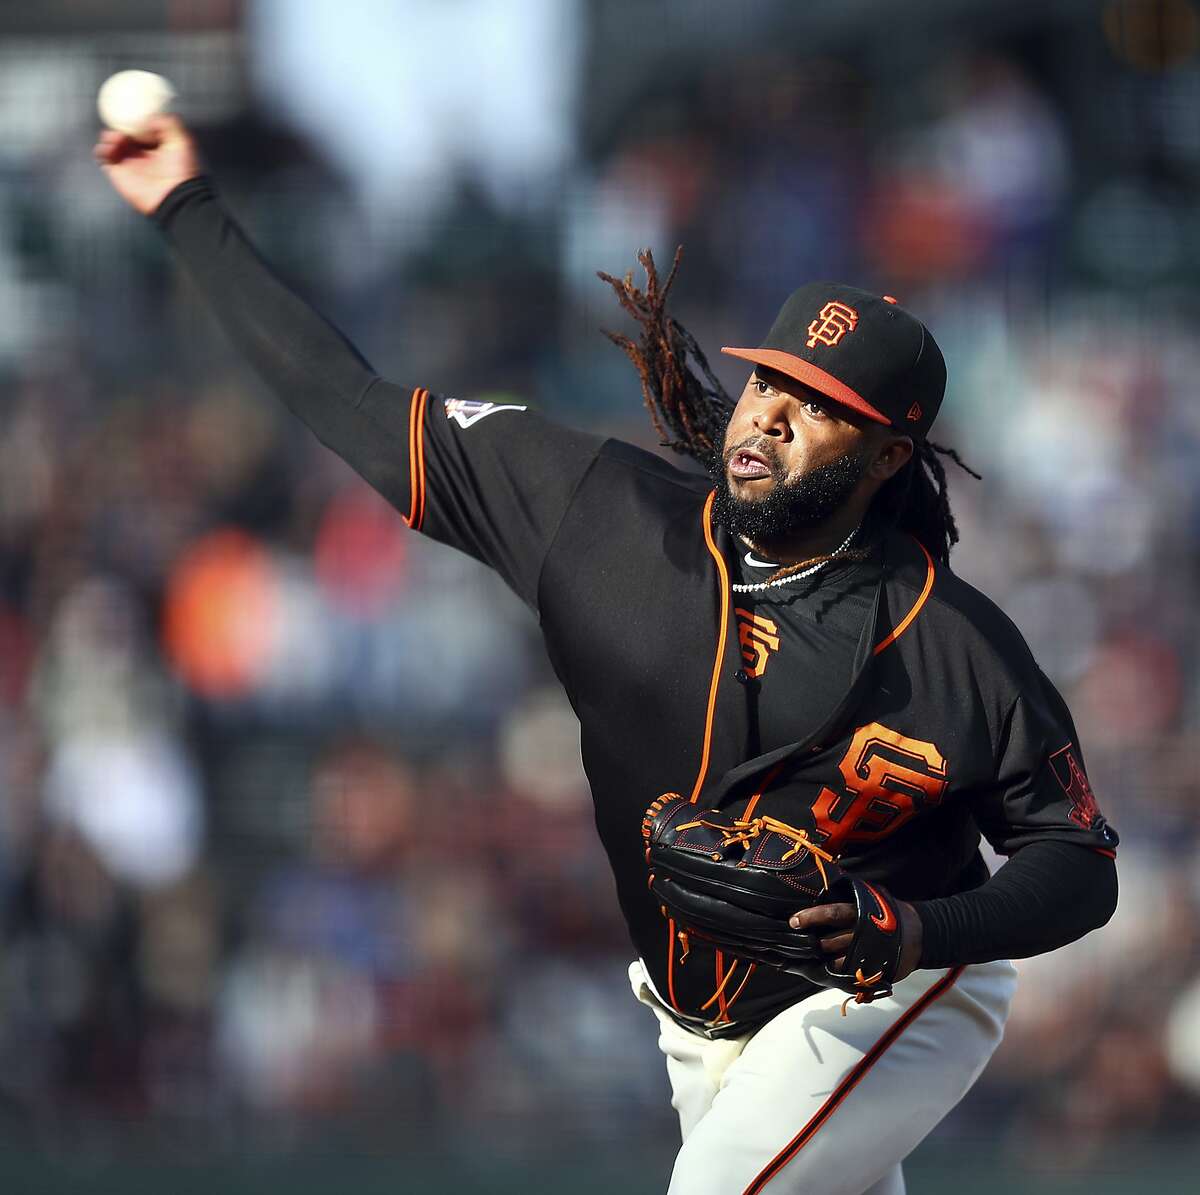 San Francisco Giants pitcher Johnny Cueto works against the Milwaukee Brewers in the first inning of a baseball game Saturday, July 28, 2018, in San Francisco. (AP Photo/Ben Margot)